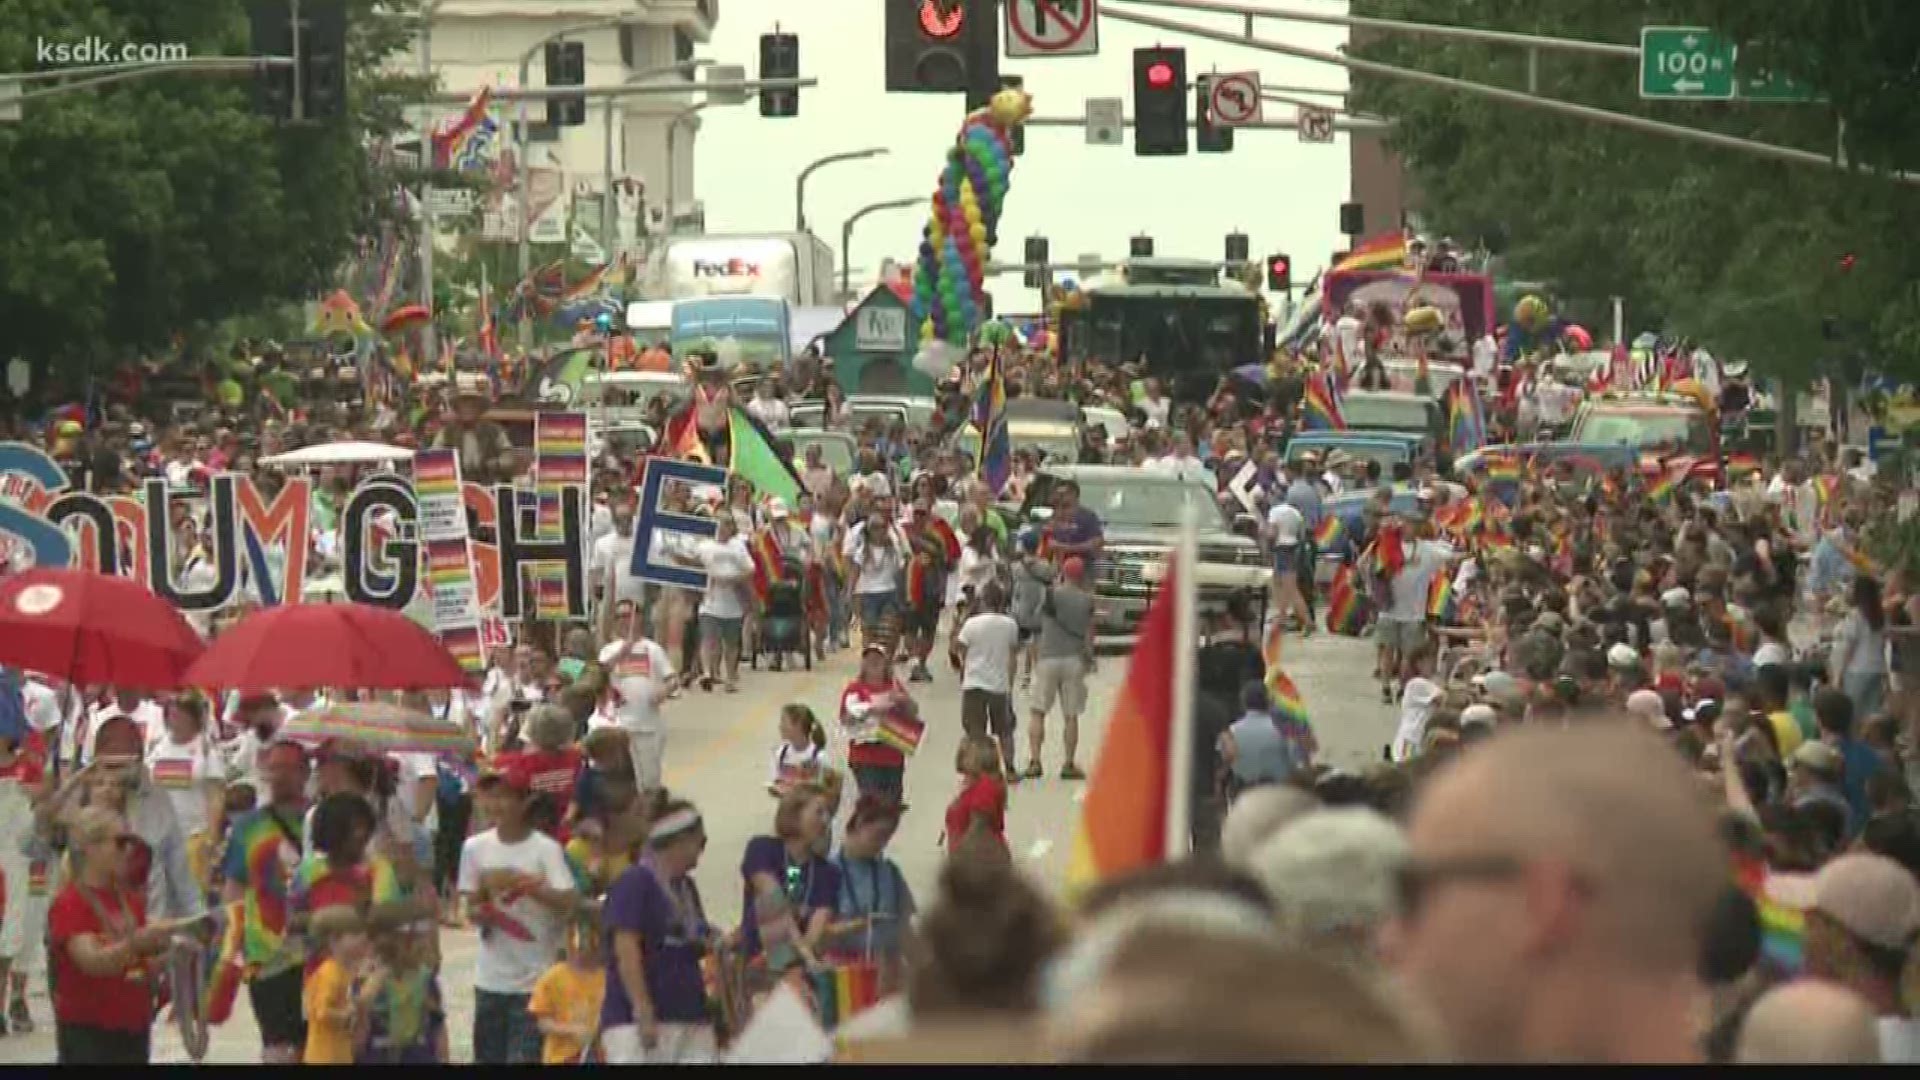 Organizers of the annual event said they made the decision to overturn the ban after talks with the mayor and the gay community.